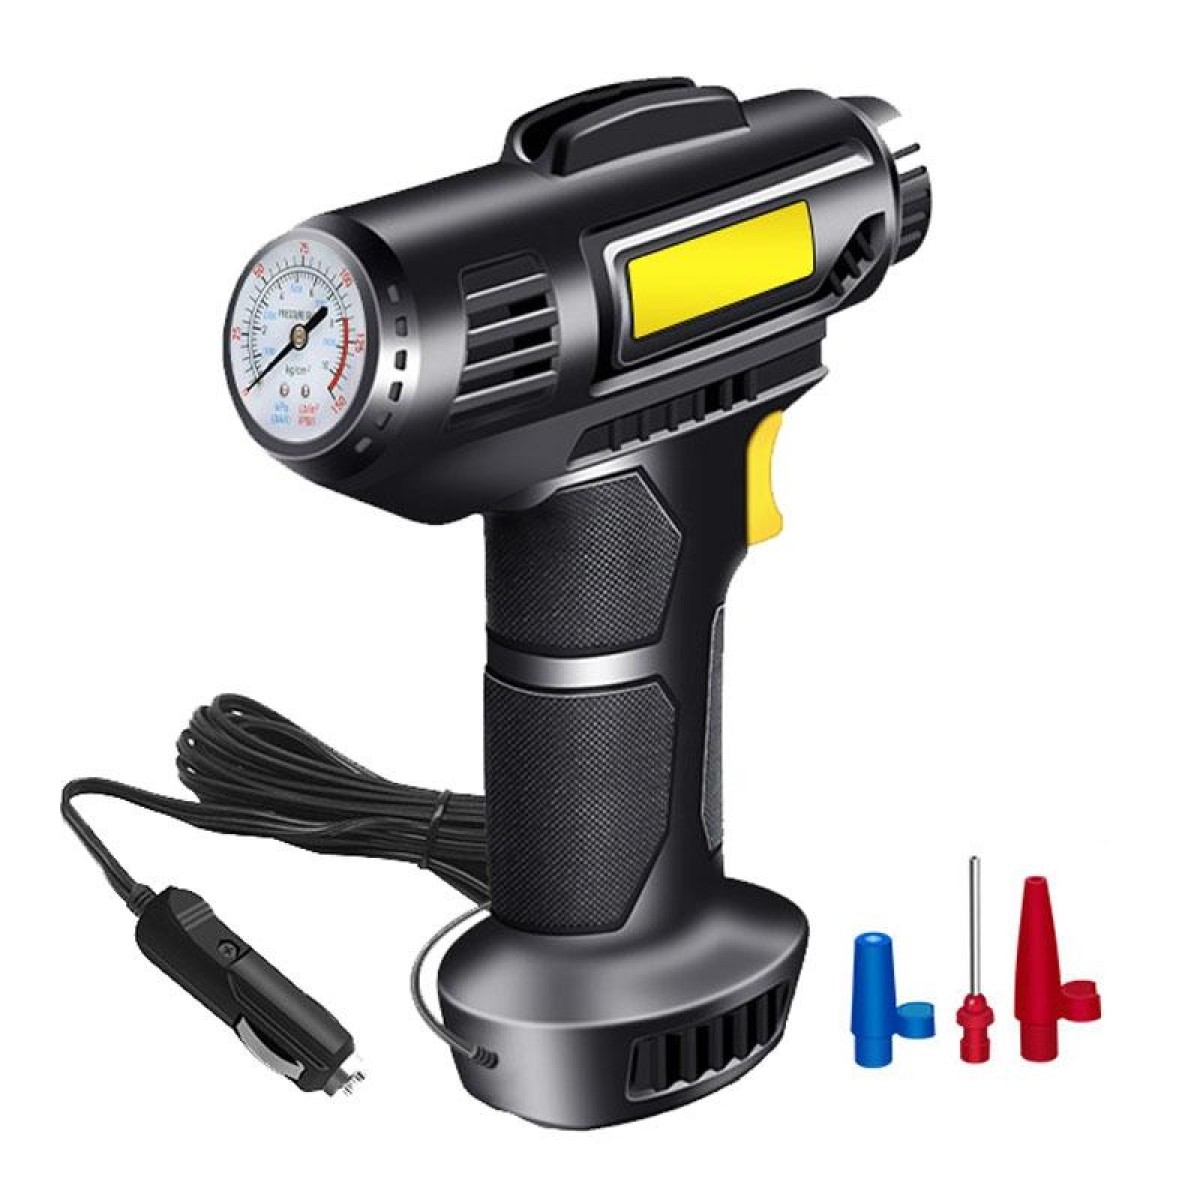 Portable Multifunctional Car Inflator Automobile Tire Pneumatic Pump, Model: Wired Pointer